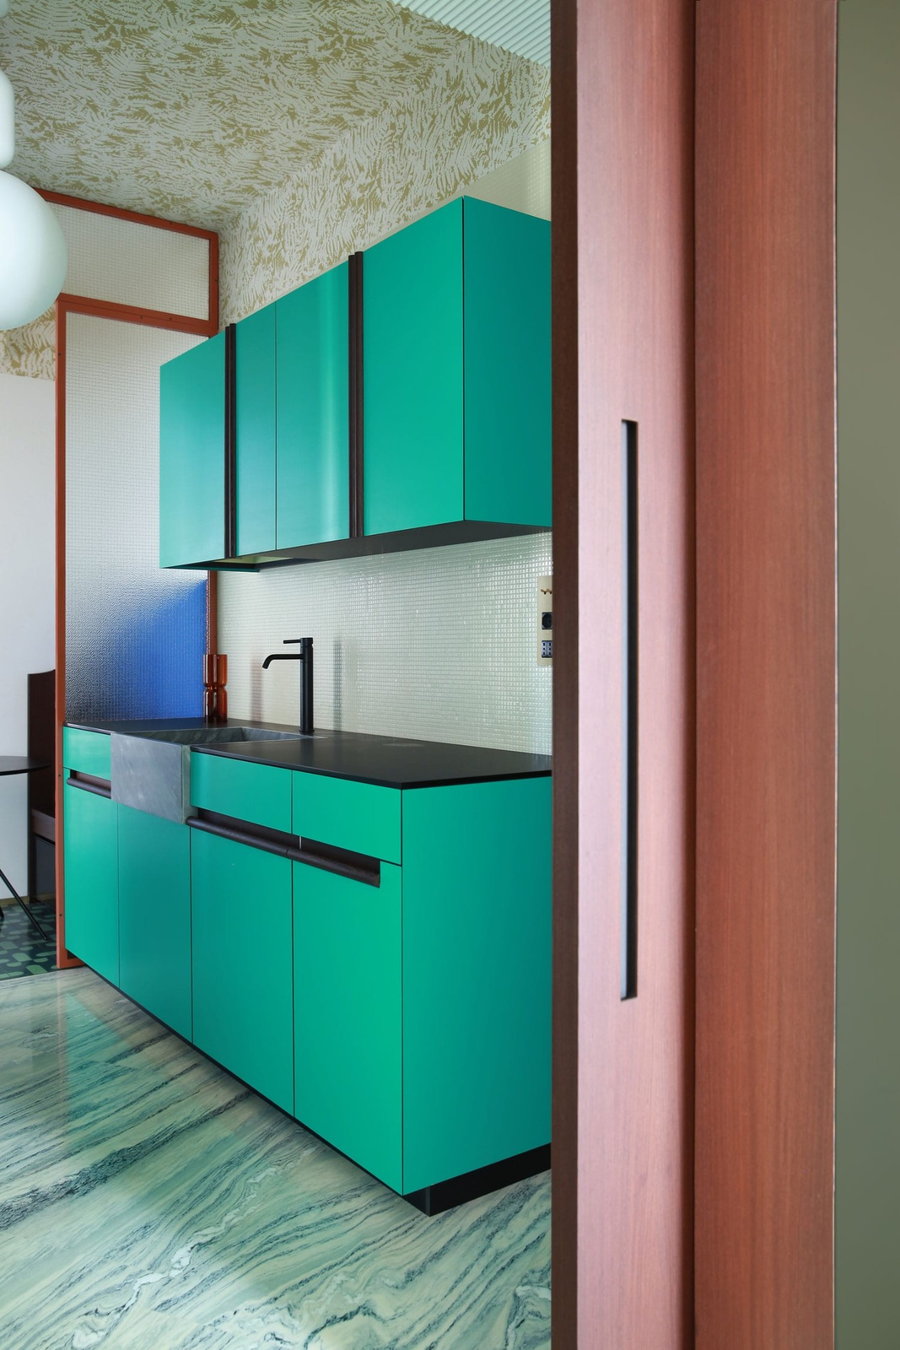 The colorful teal kitchen area inside the renovated Teorema Milanese